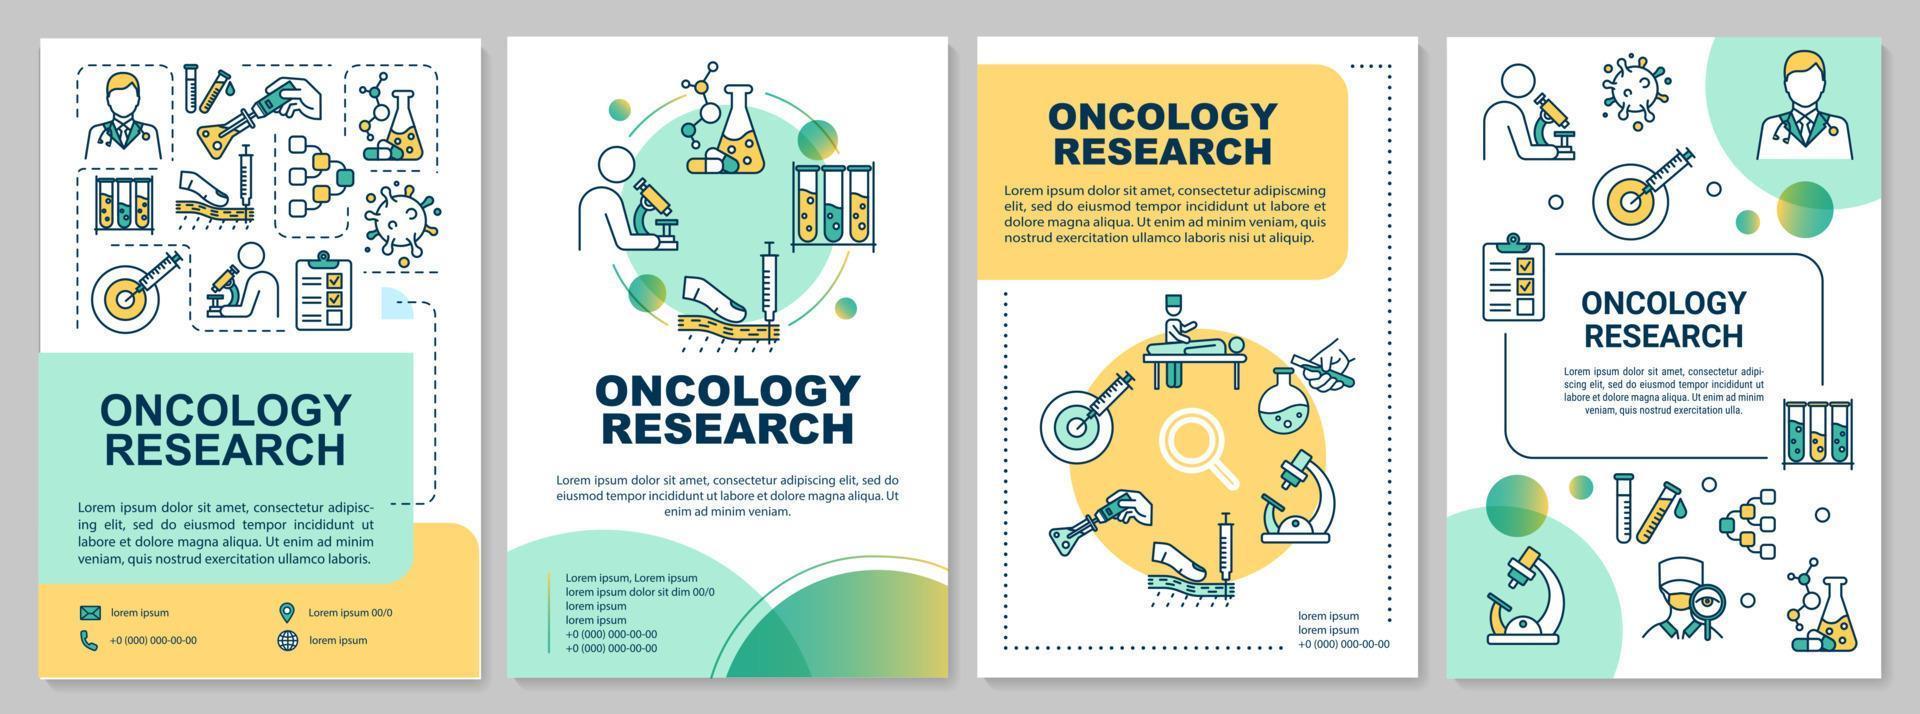 Oncology research brochure template. Cancer laboratory examinations. Flyer, booklet, leaflet print, cover design with linear icons. Vector layouts for magazines, annual reports, advertising posters